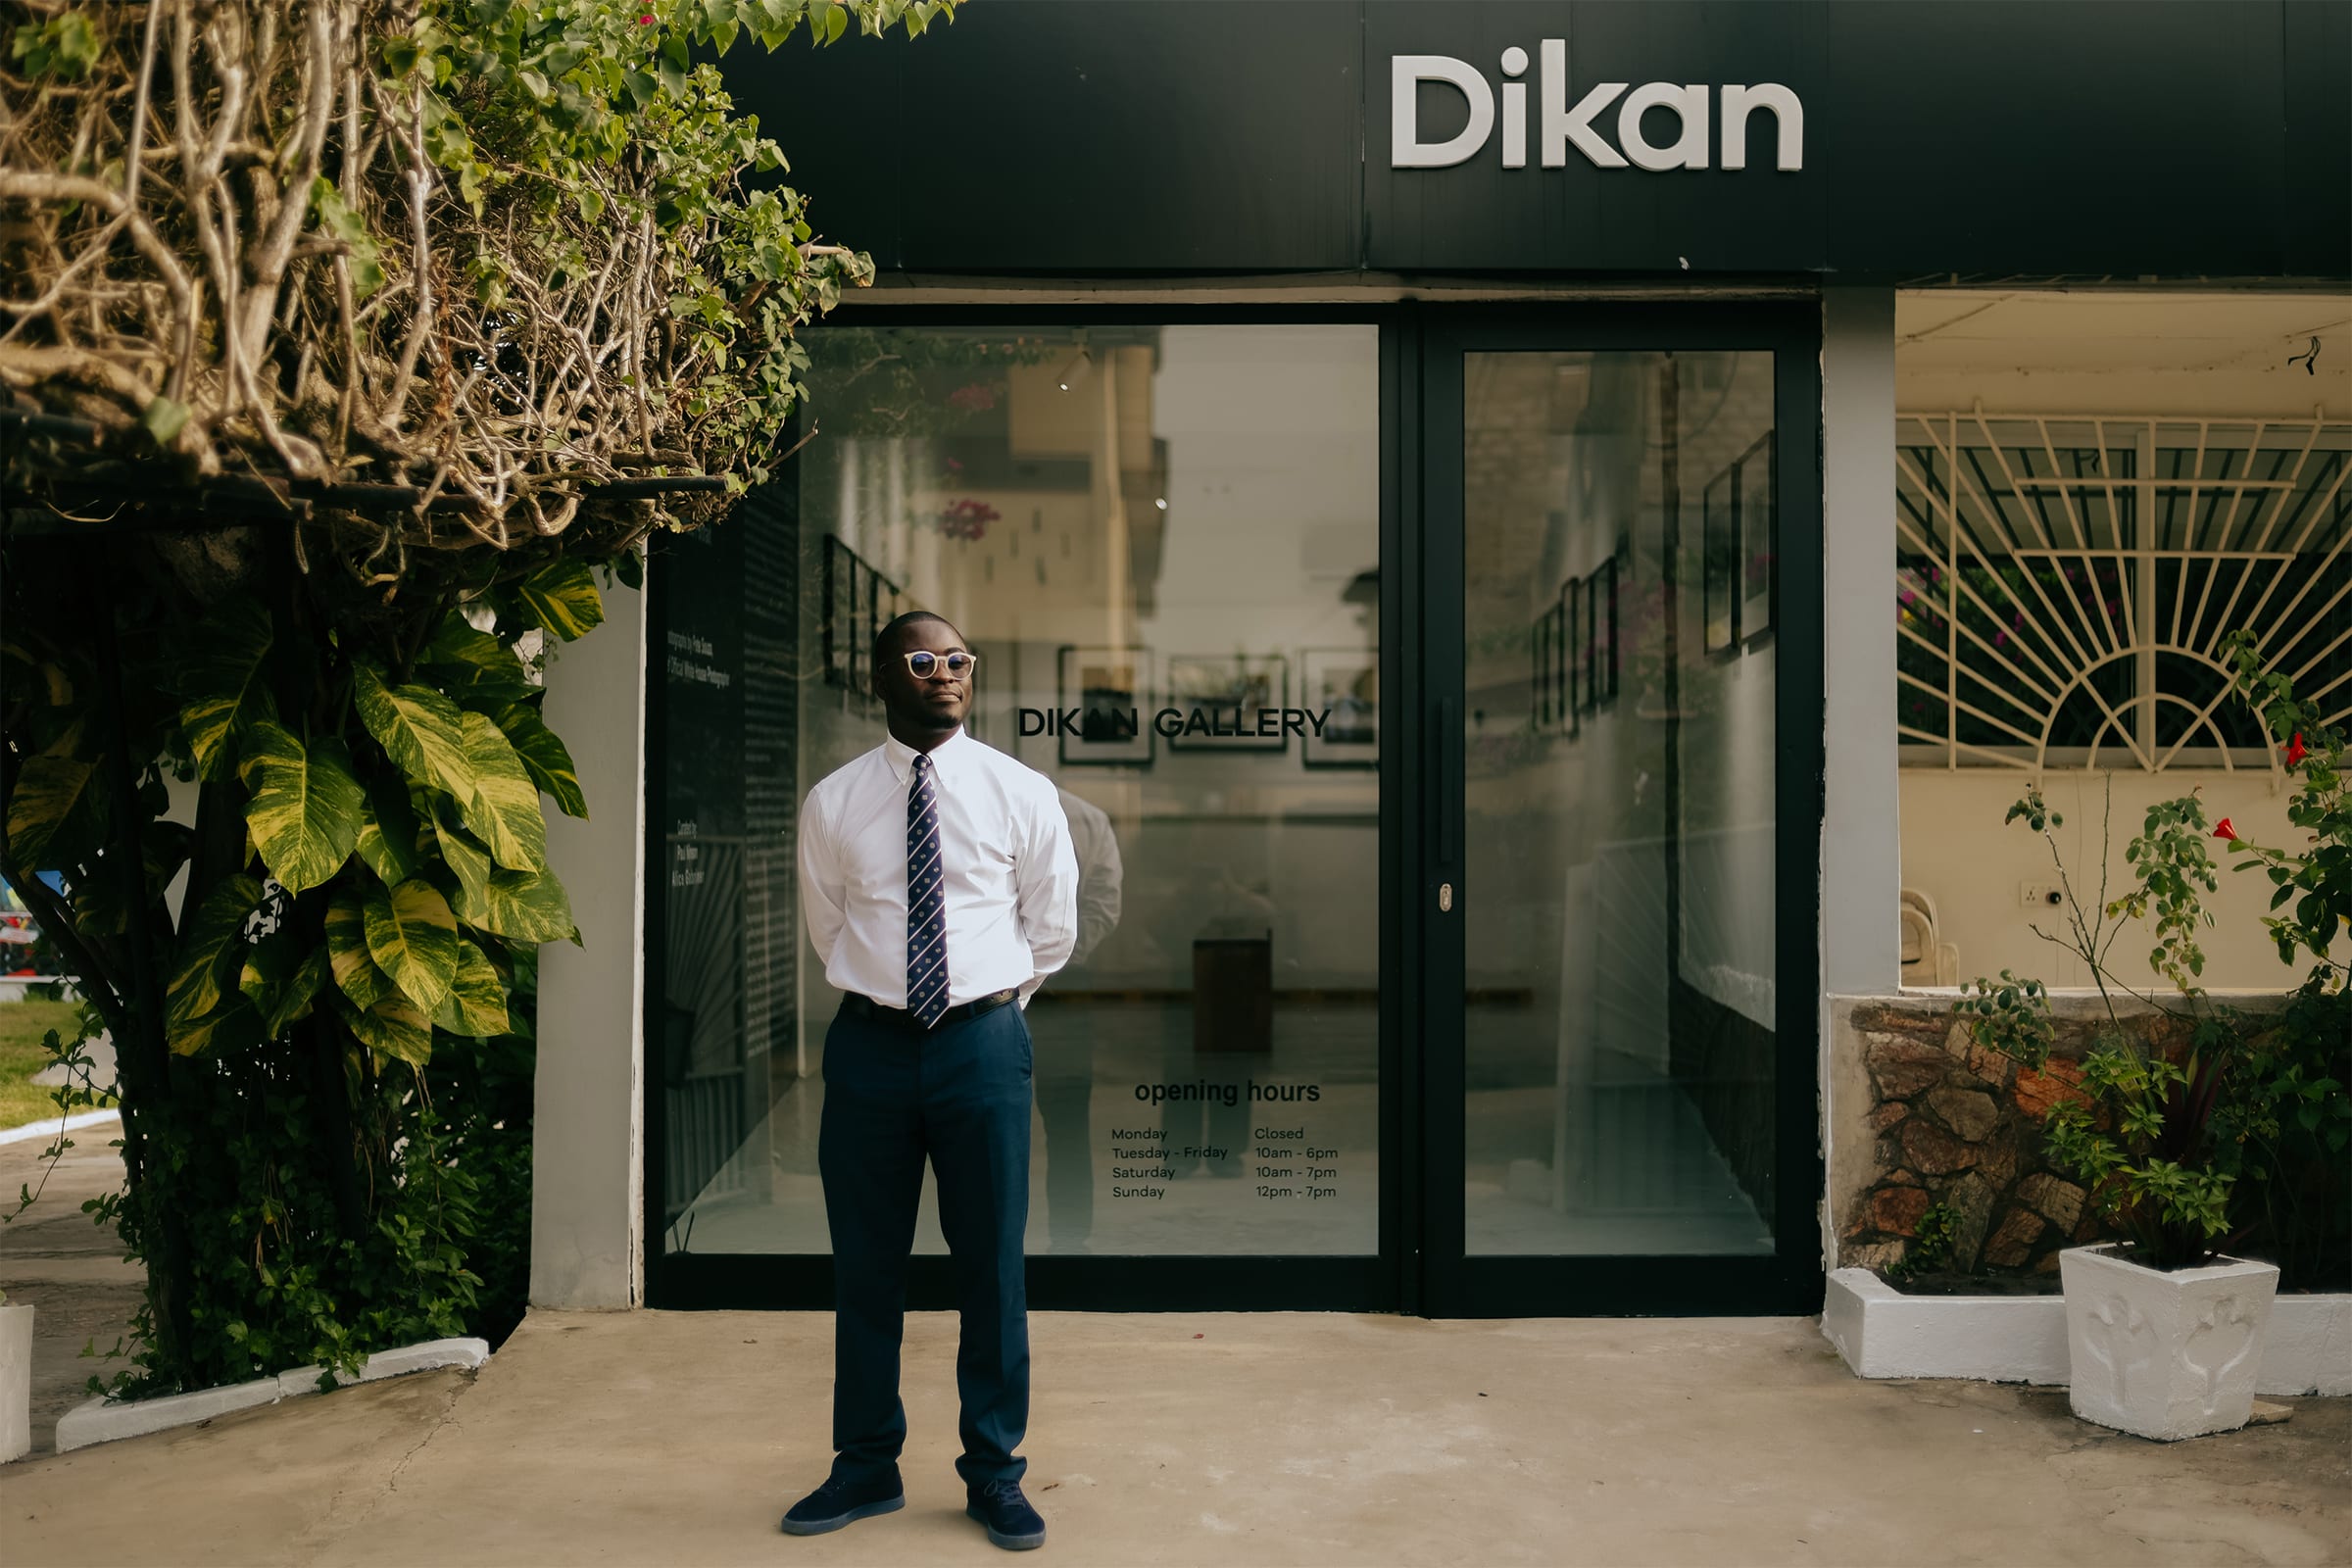 Photographer, filmmaker, and curator Paul Ninson at Dikan Gallery, which he founded. Photography by Rachel Seidu for Art Basel.